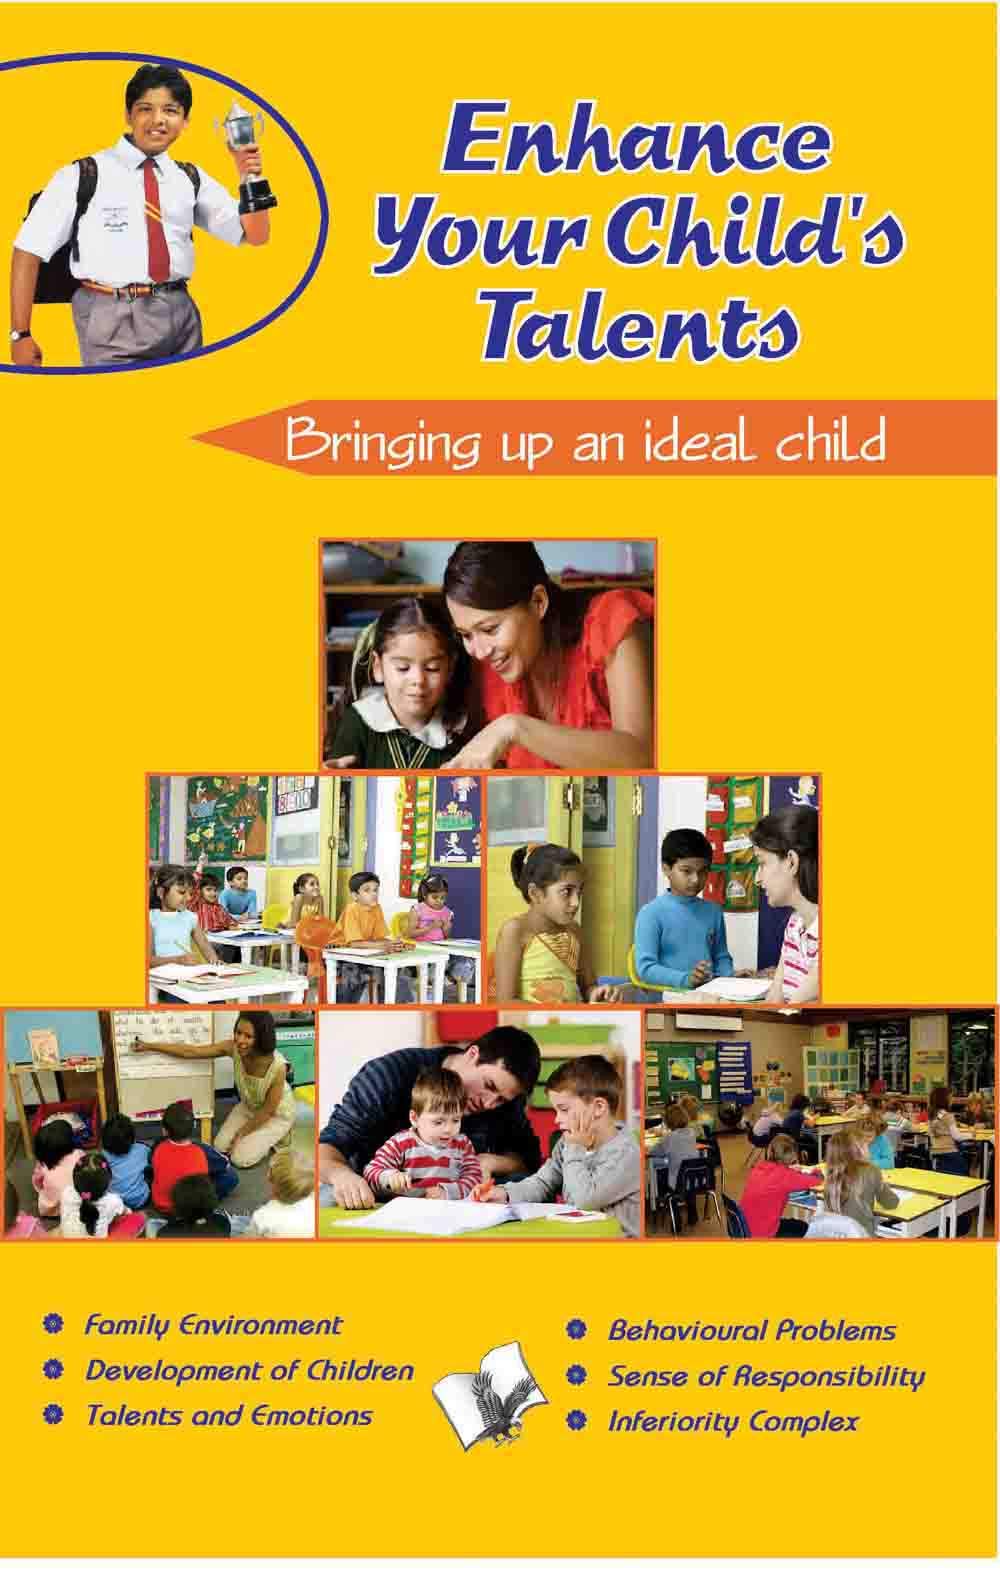 ENHANCE YOUR CHILD'S TALENTS: BRINGING UP AN IDEAL CHILD